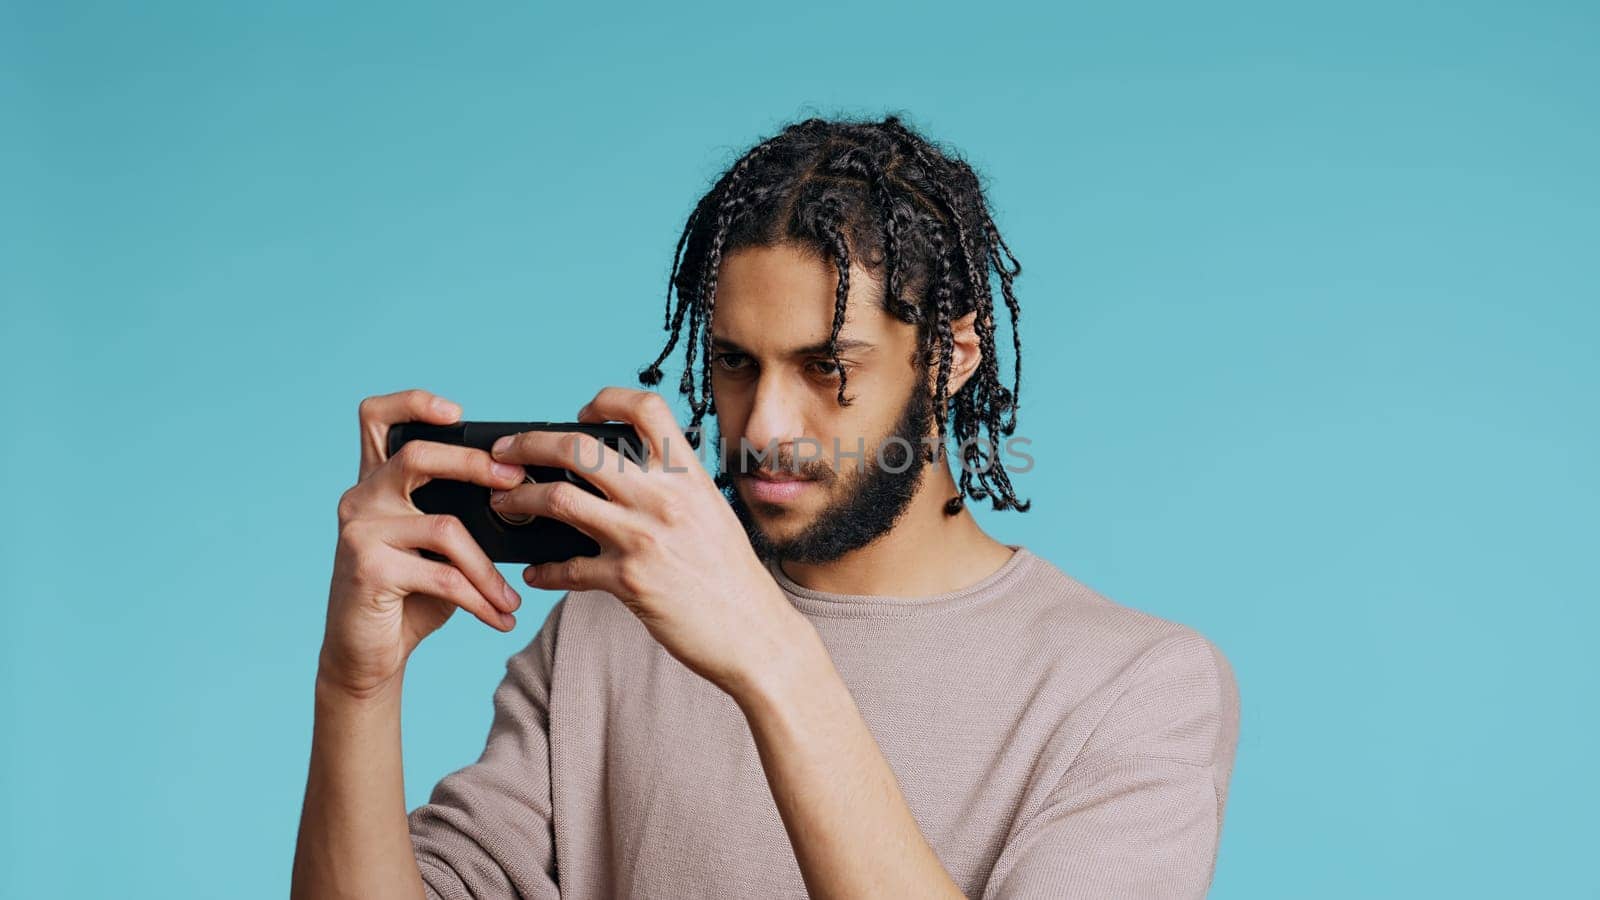 Gamer disappointed after receiving game over screen on cellphone touchscreen display. Middle Eastern man nodding head, upset after losing videogame, playing on phone, studio background, camera B